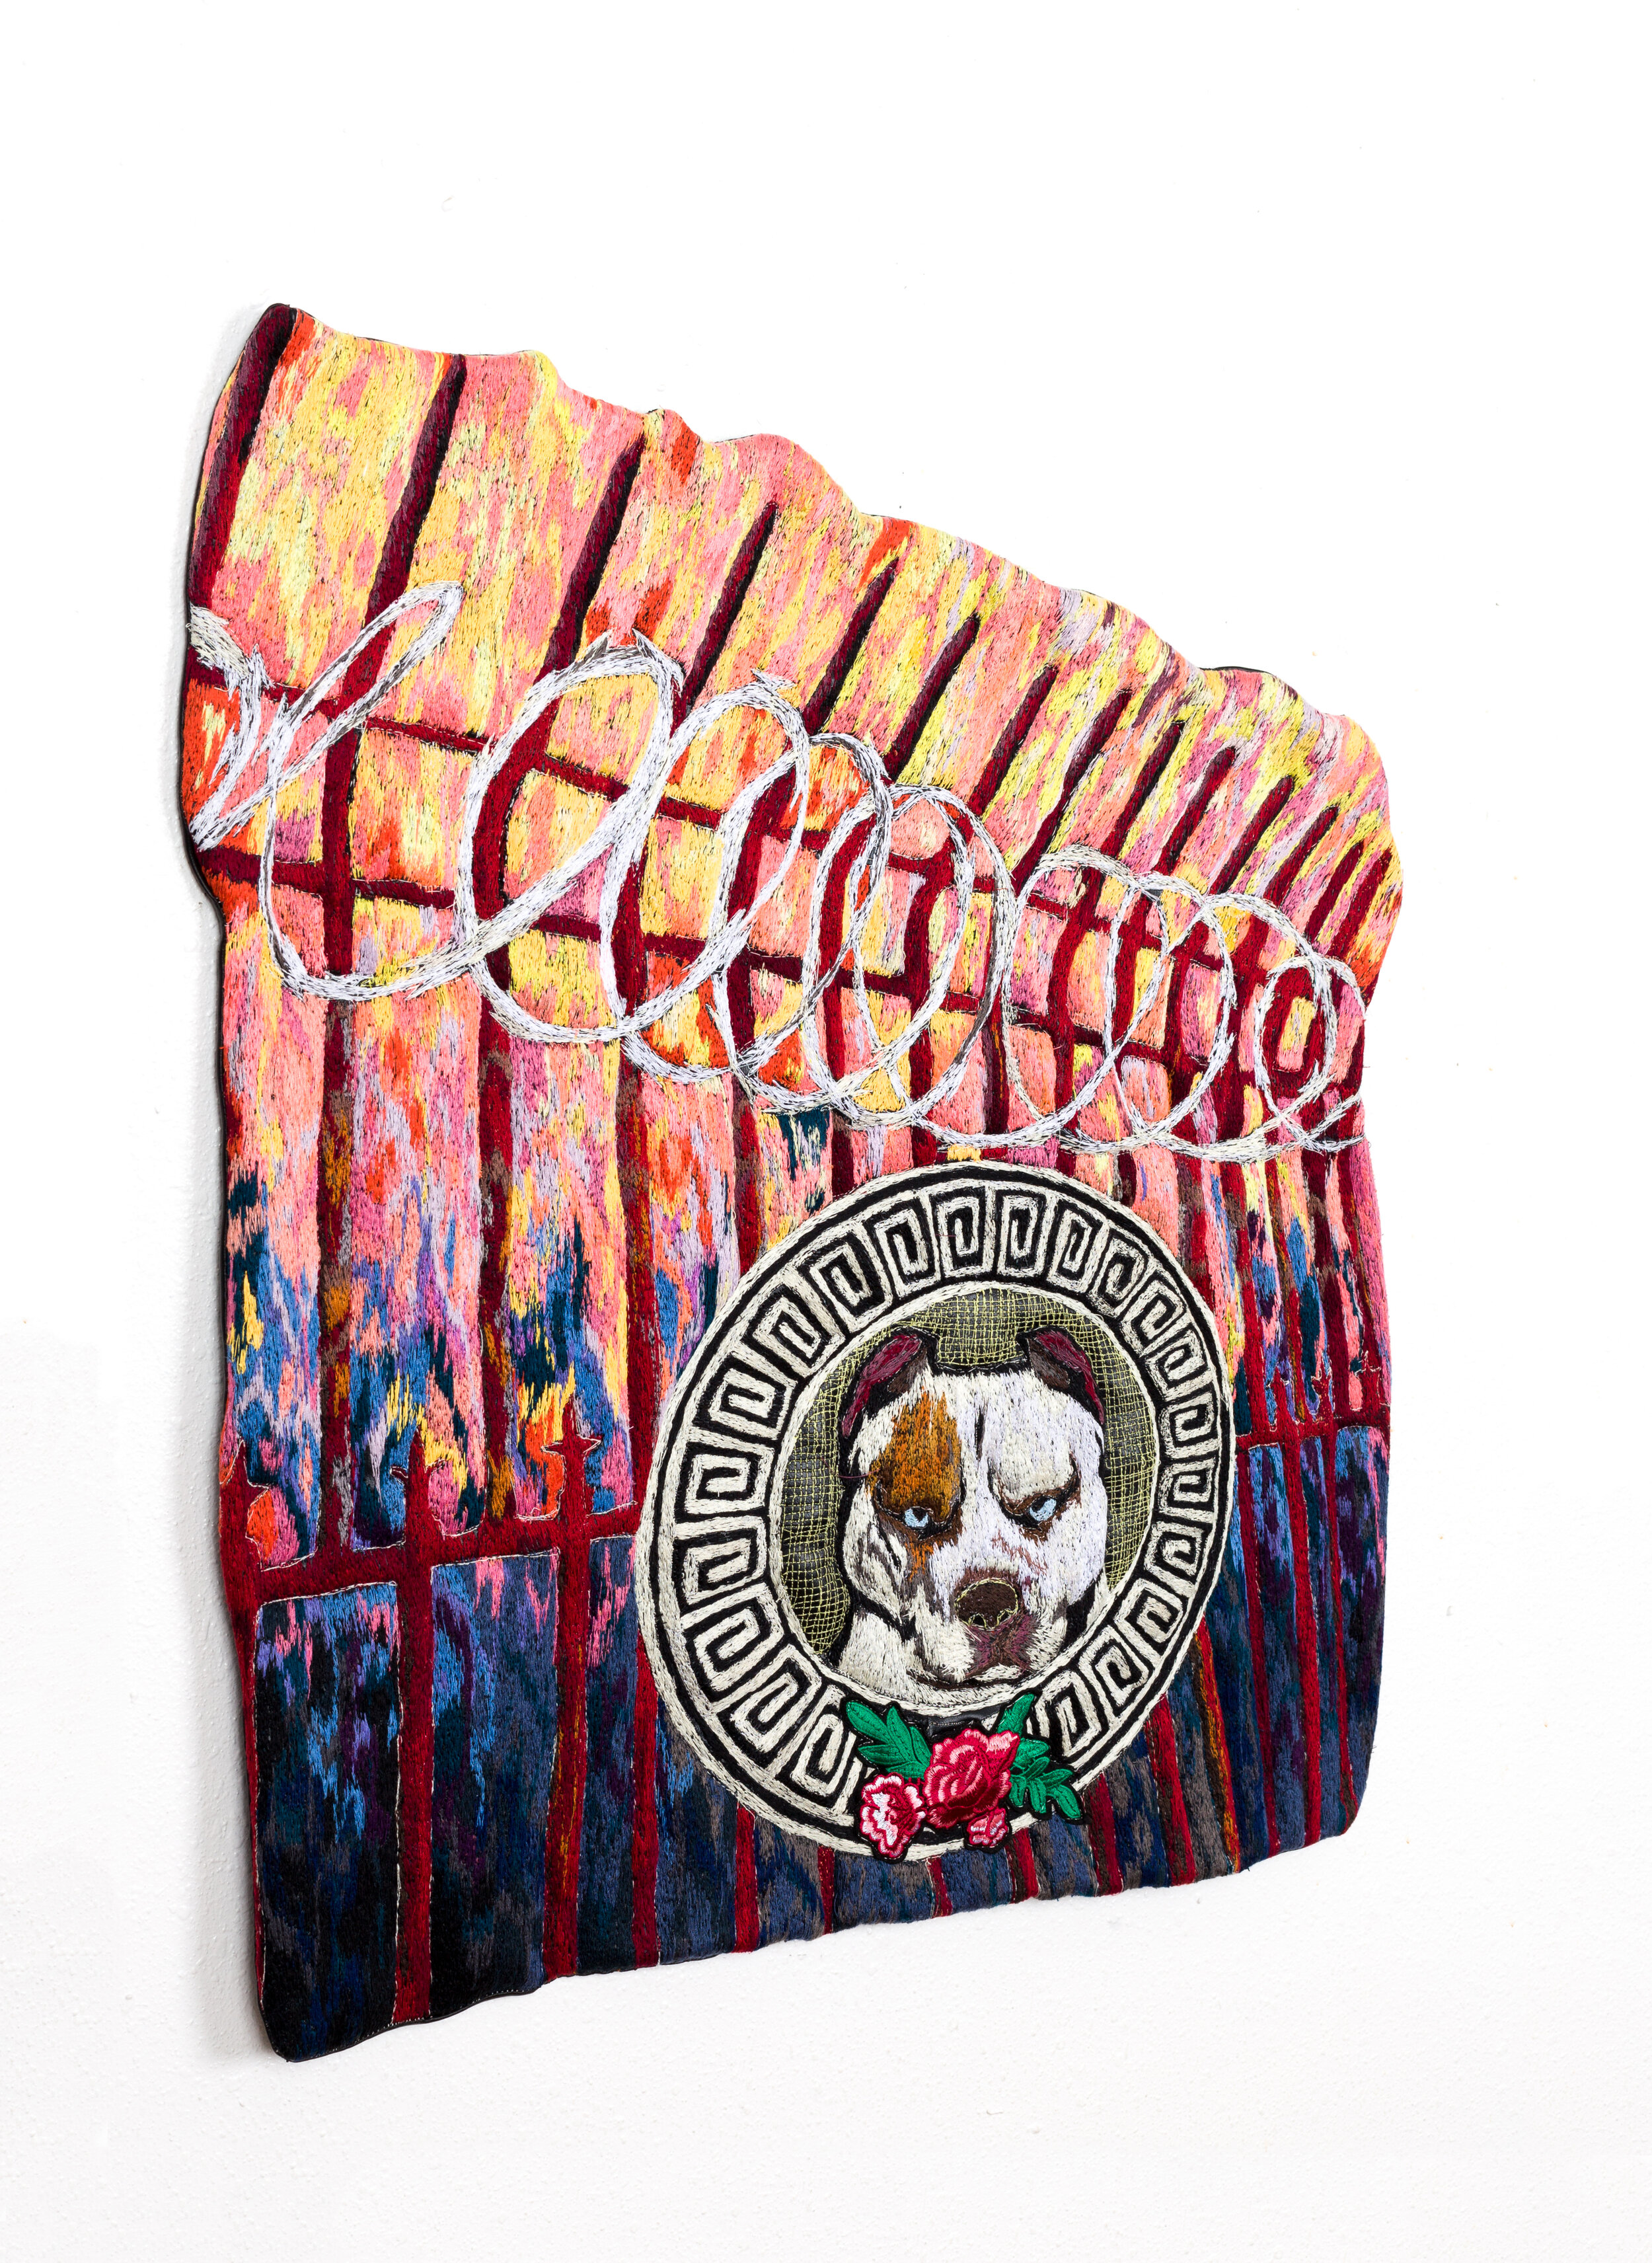  Protector (perro que ladra no muerde), 2020   Faux leather, polyester thread, polyurethane foam, hardware, found embroidered patch  24x26.5 inches 